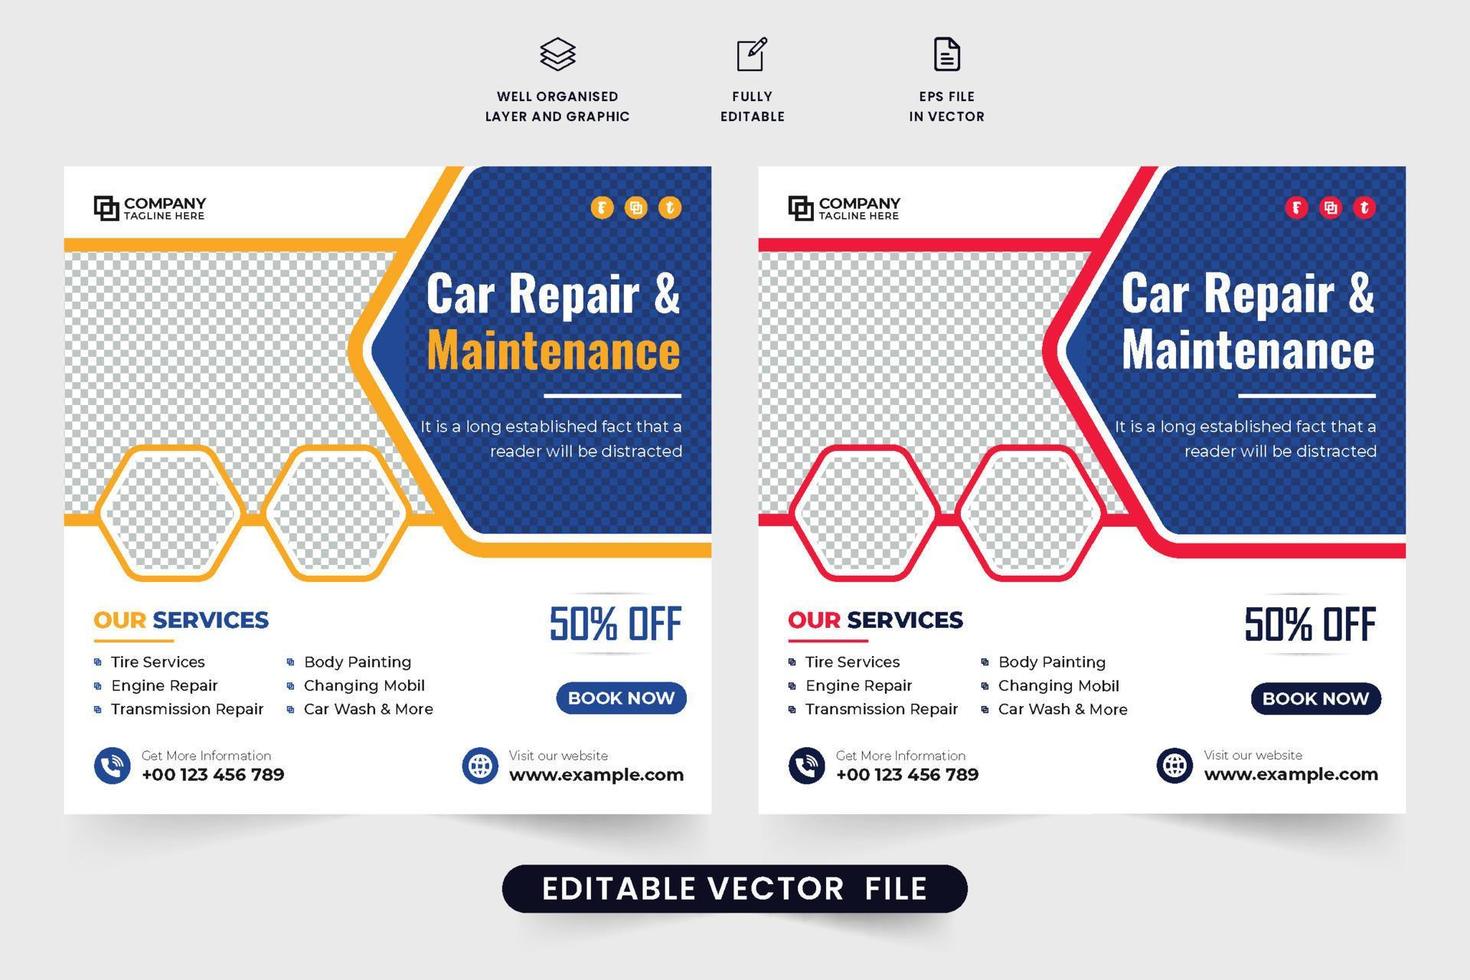 Vehicle repair social media post vector with yellow and red colors. Modern car maintenance service template for business promotion. Car repair service advertisement poster design for digital marketing